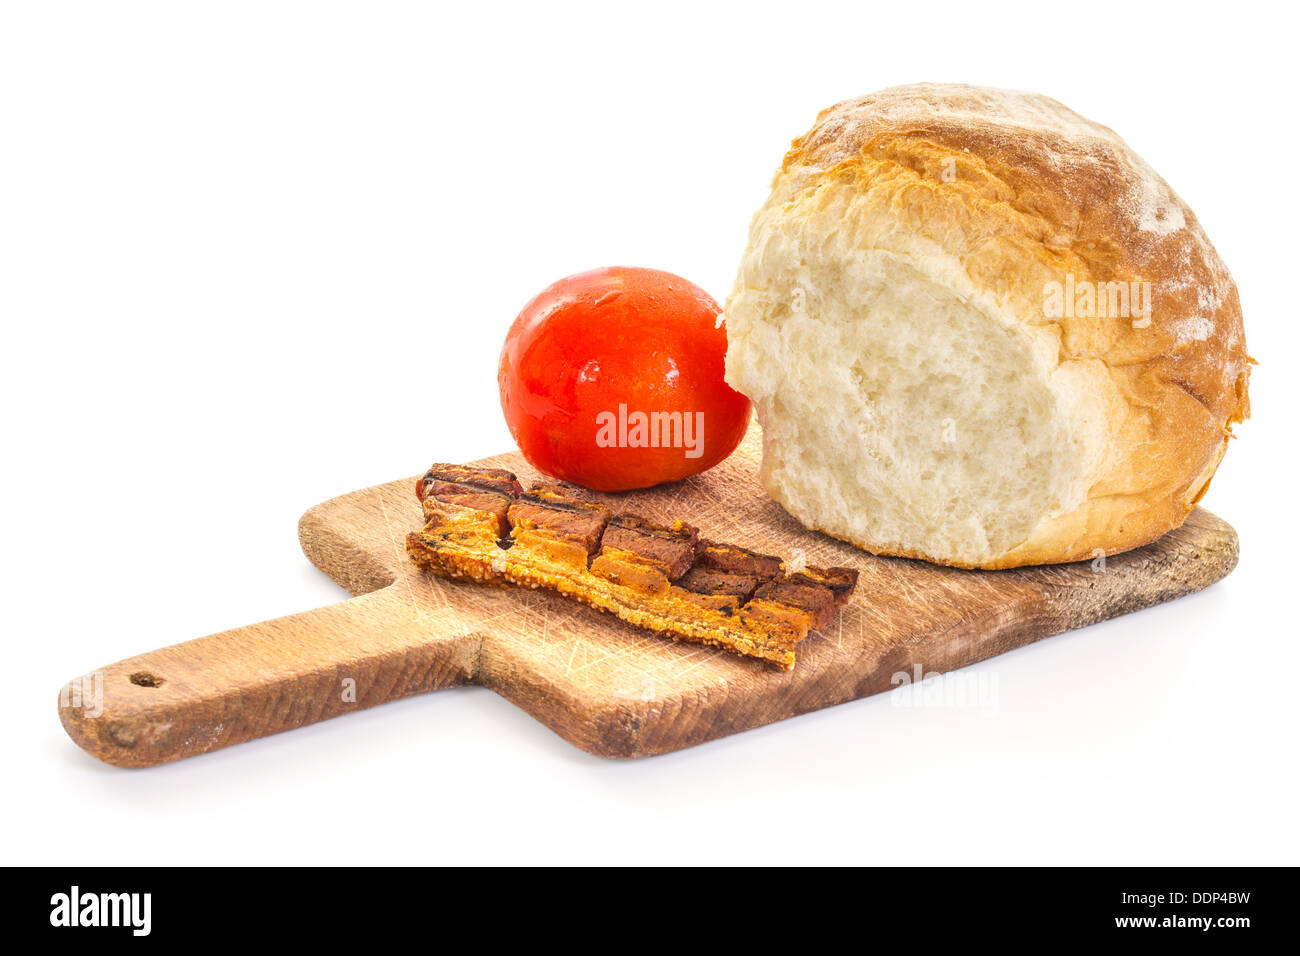 Grilled or Fried Bacon with Fresh Tomato and Bread Bun on the Cutting Board, high key Stock Photo